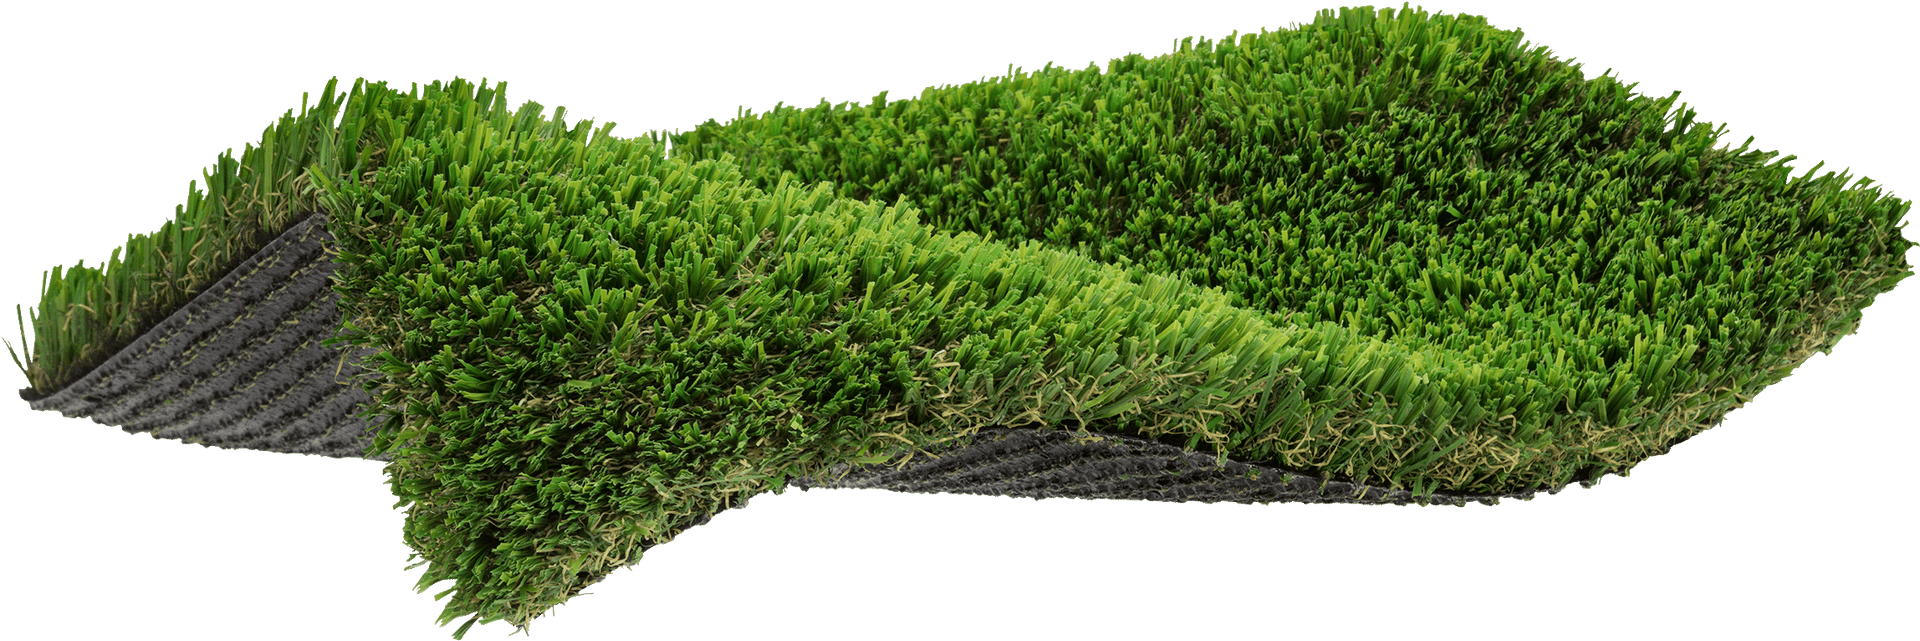 Artificial Turf Sample Texture PNG